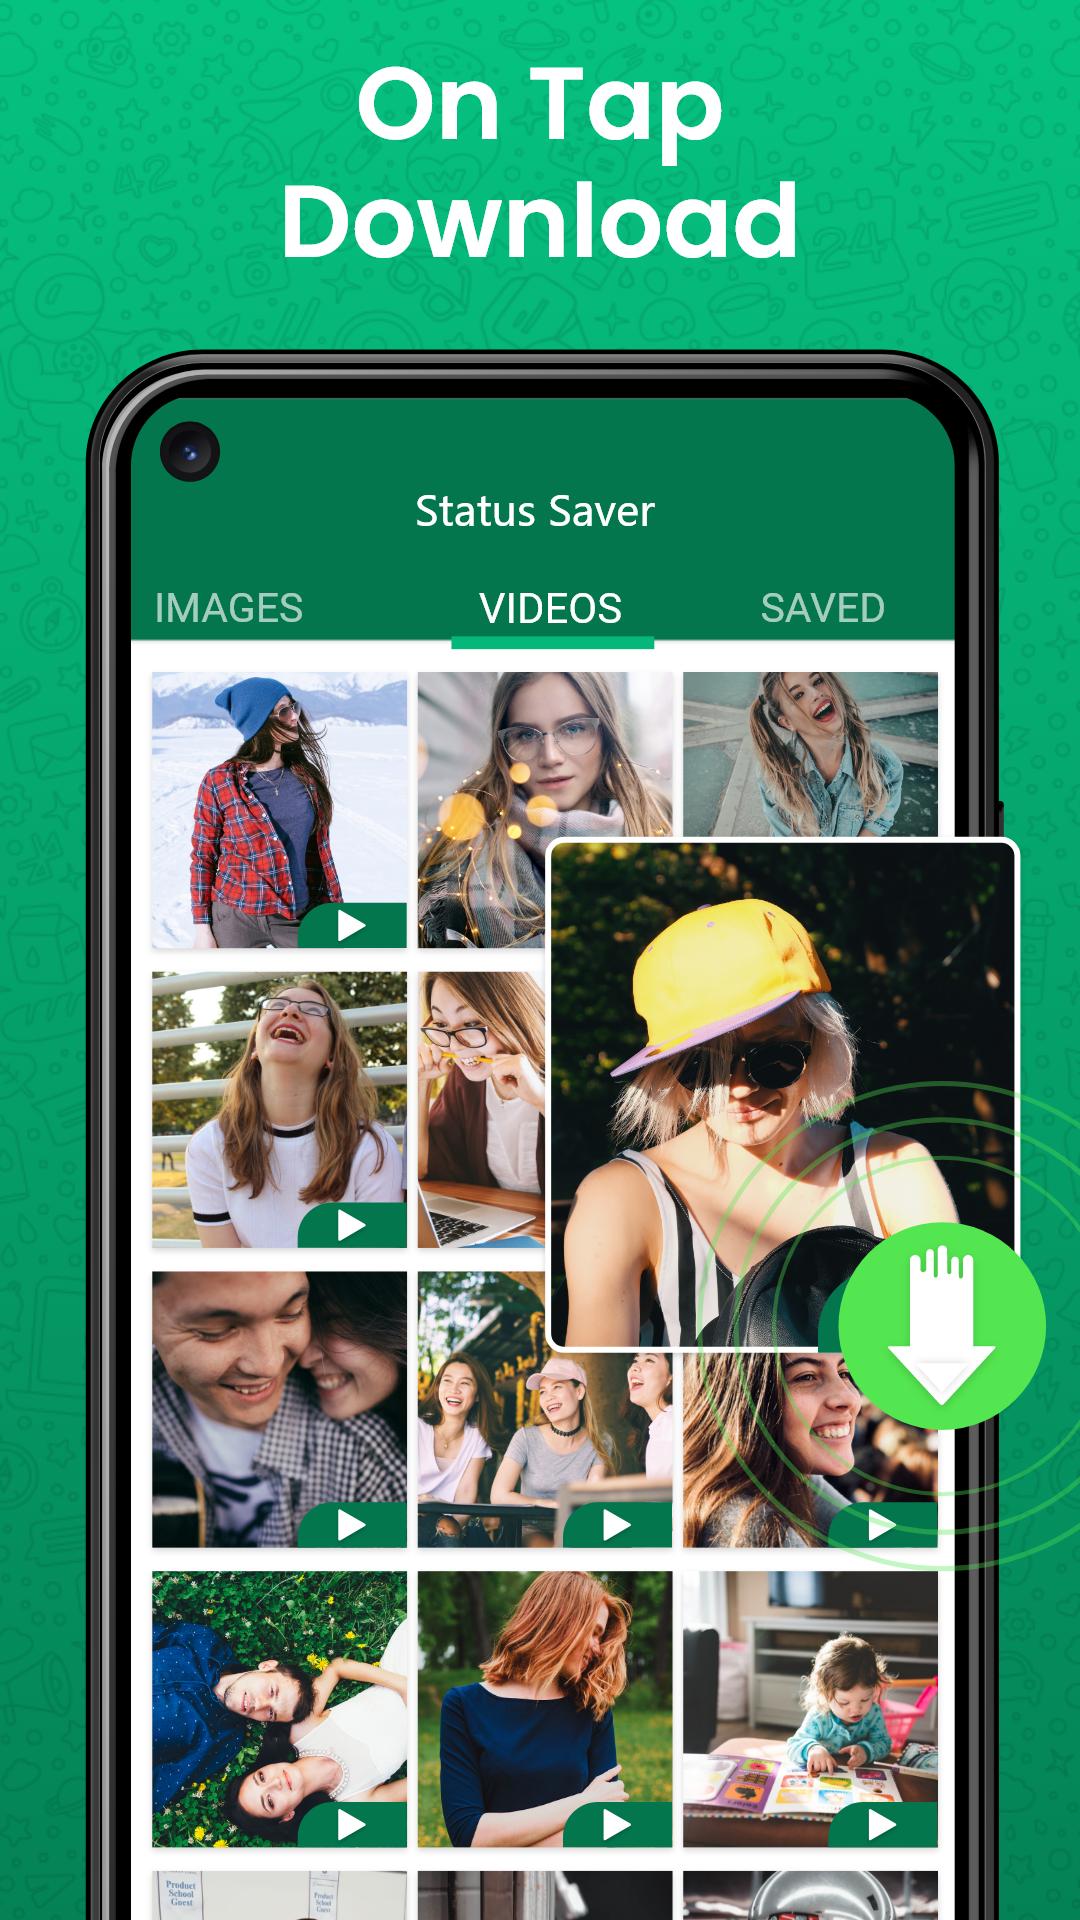 Status views. Saver story download. Saver story for download.